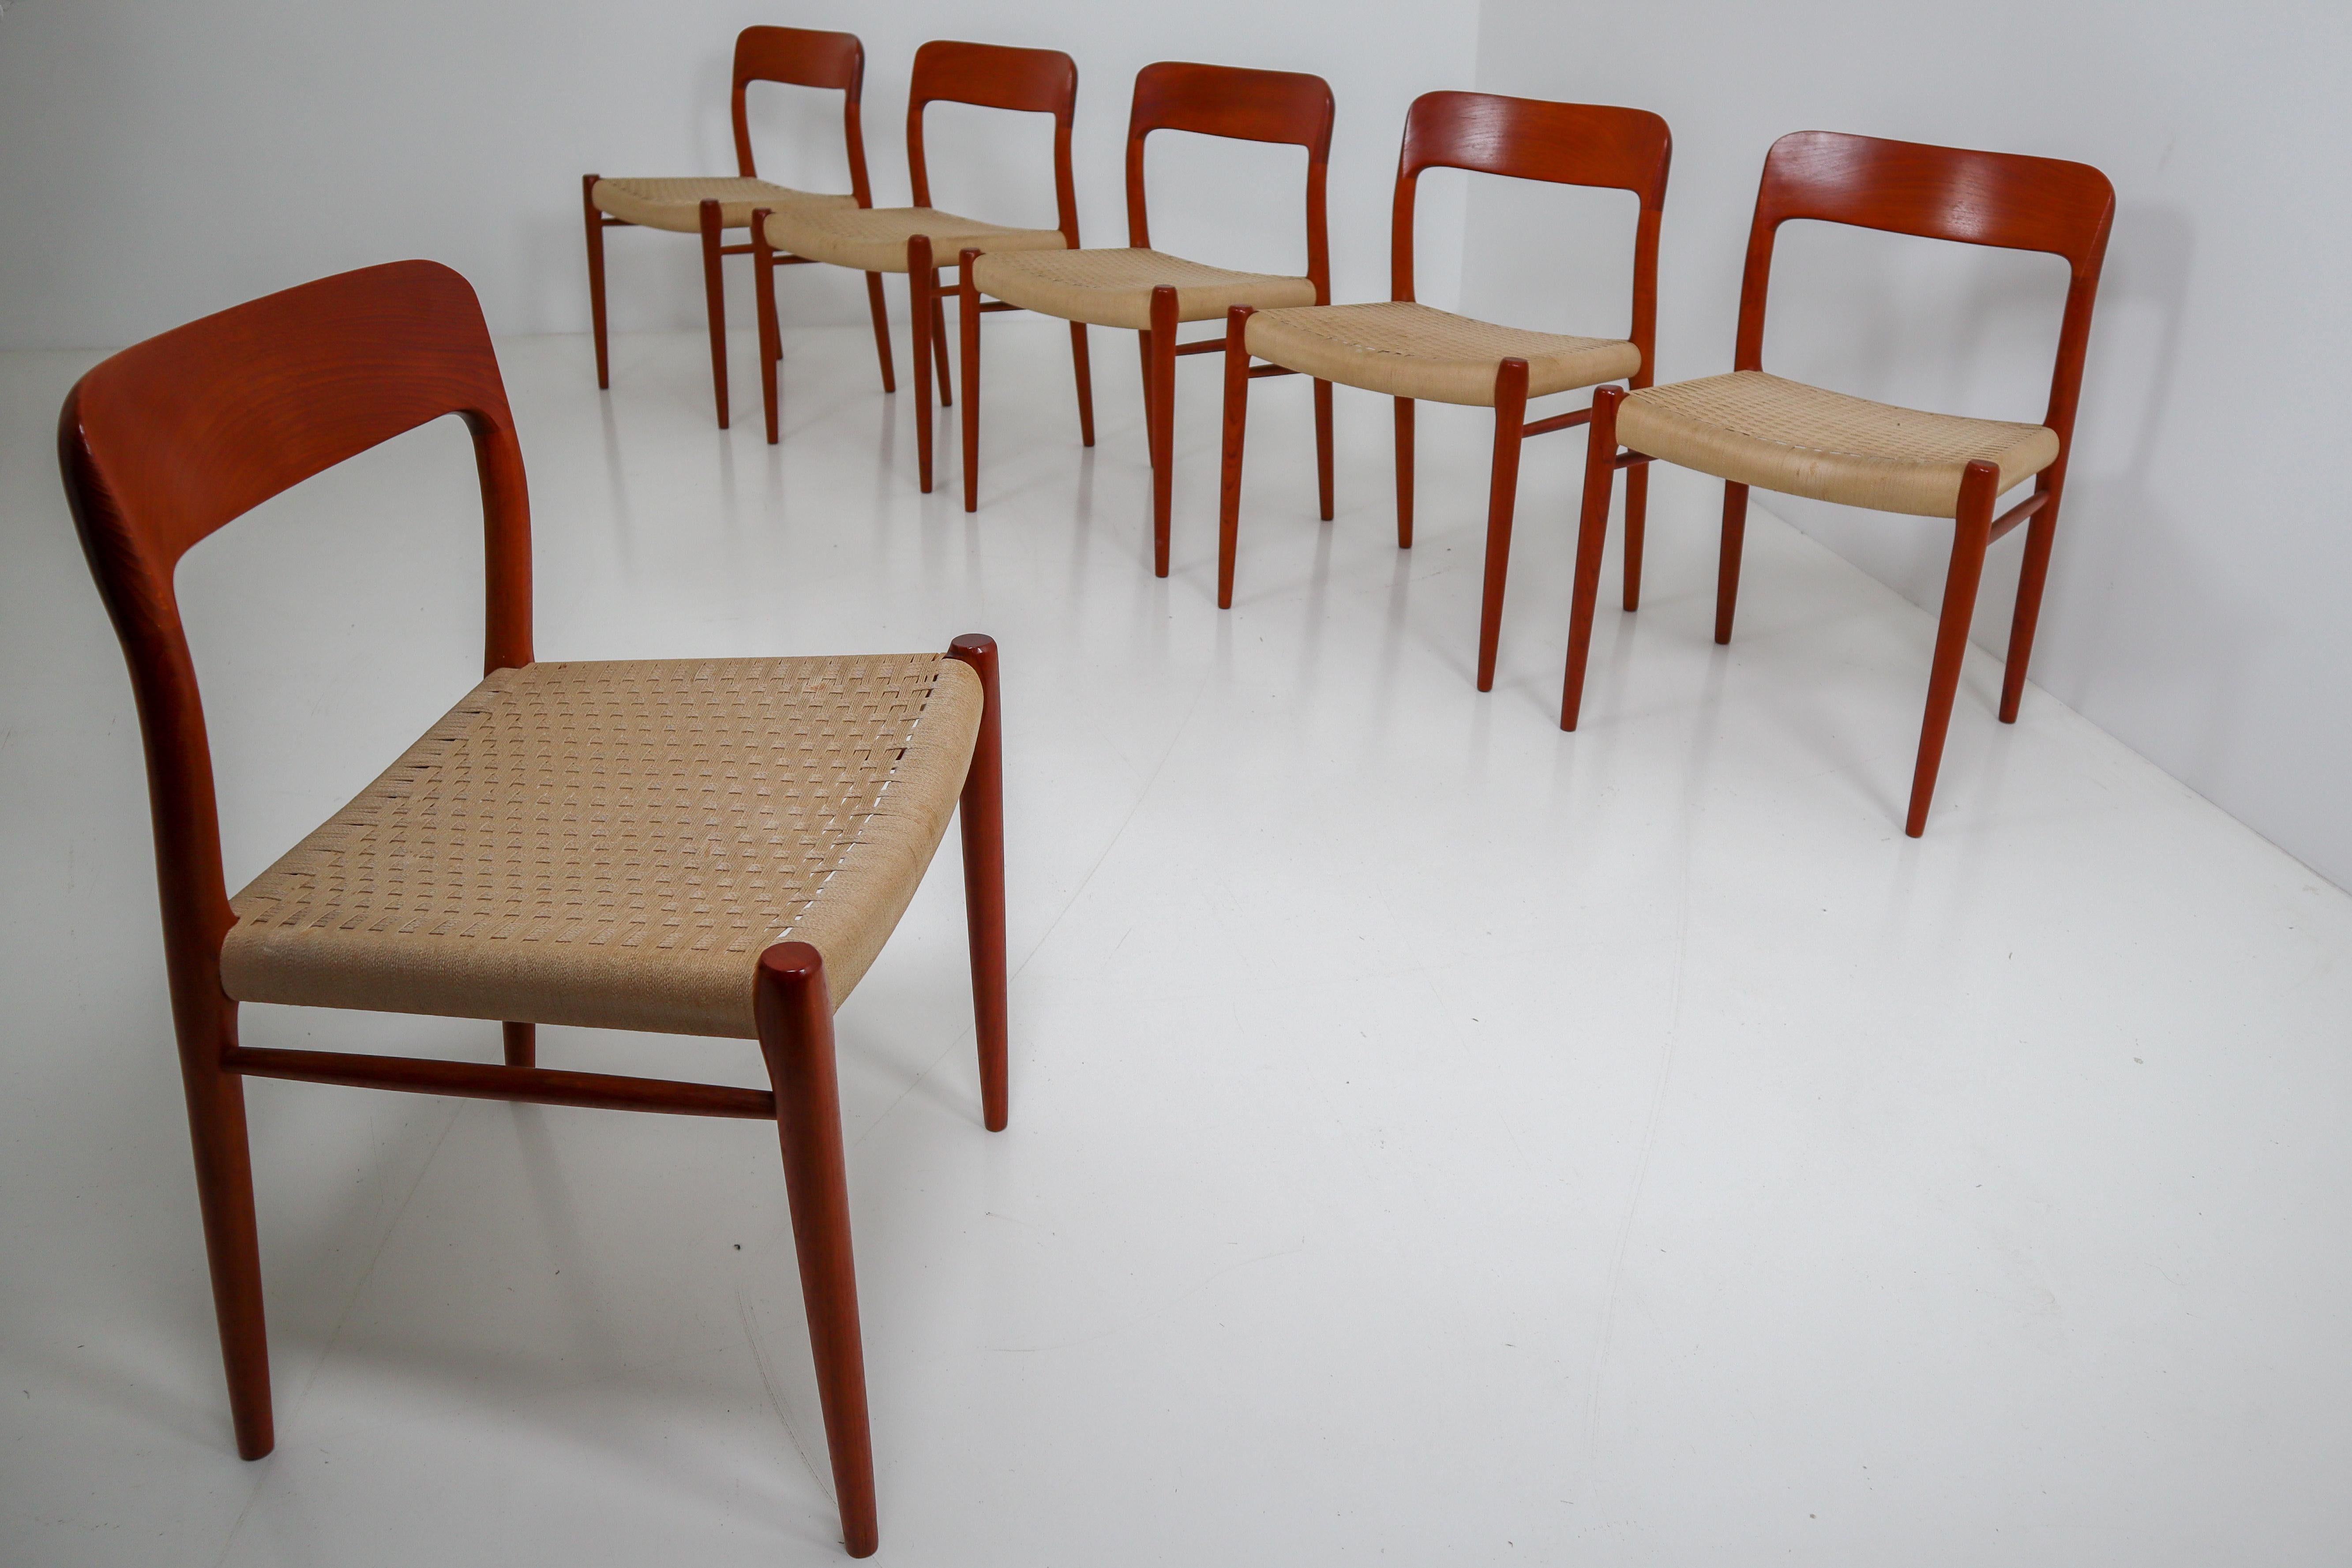 Set of six midcentury dining chairs model 75 - one of the all-time great dining chairs to come out of the midcentury era and as popular as ever. Designed in 1954 by Niels O. Møller for J. L.Møllers Møbelfabrik,. Made from solid teak and seats of